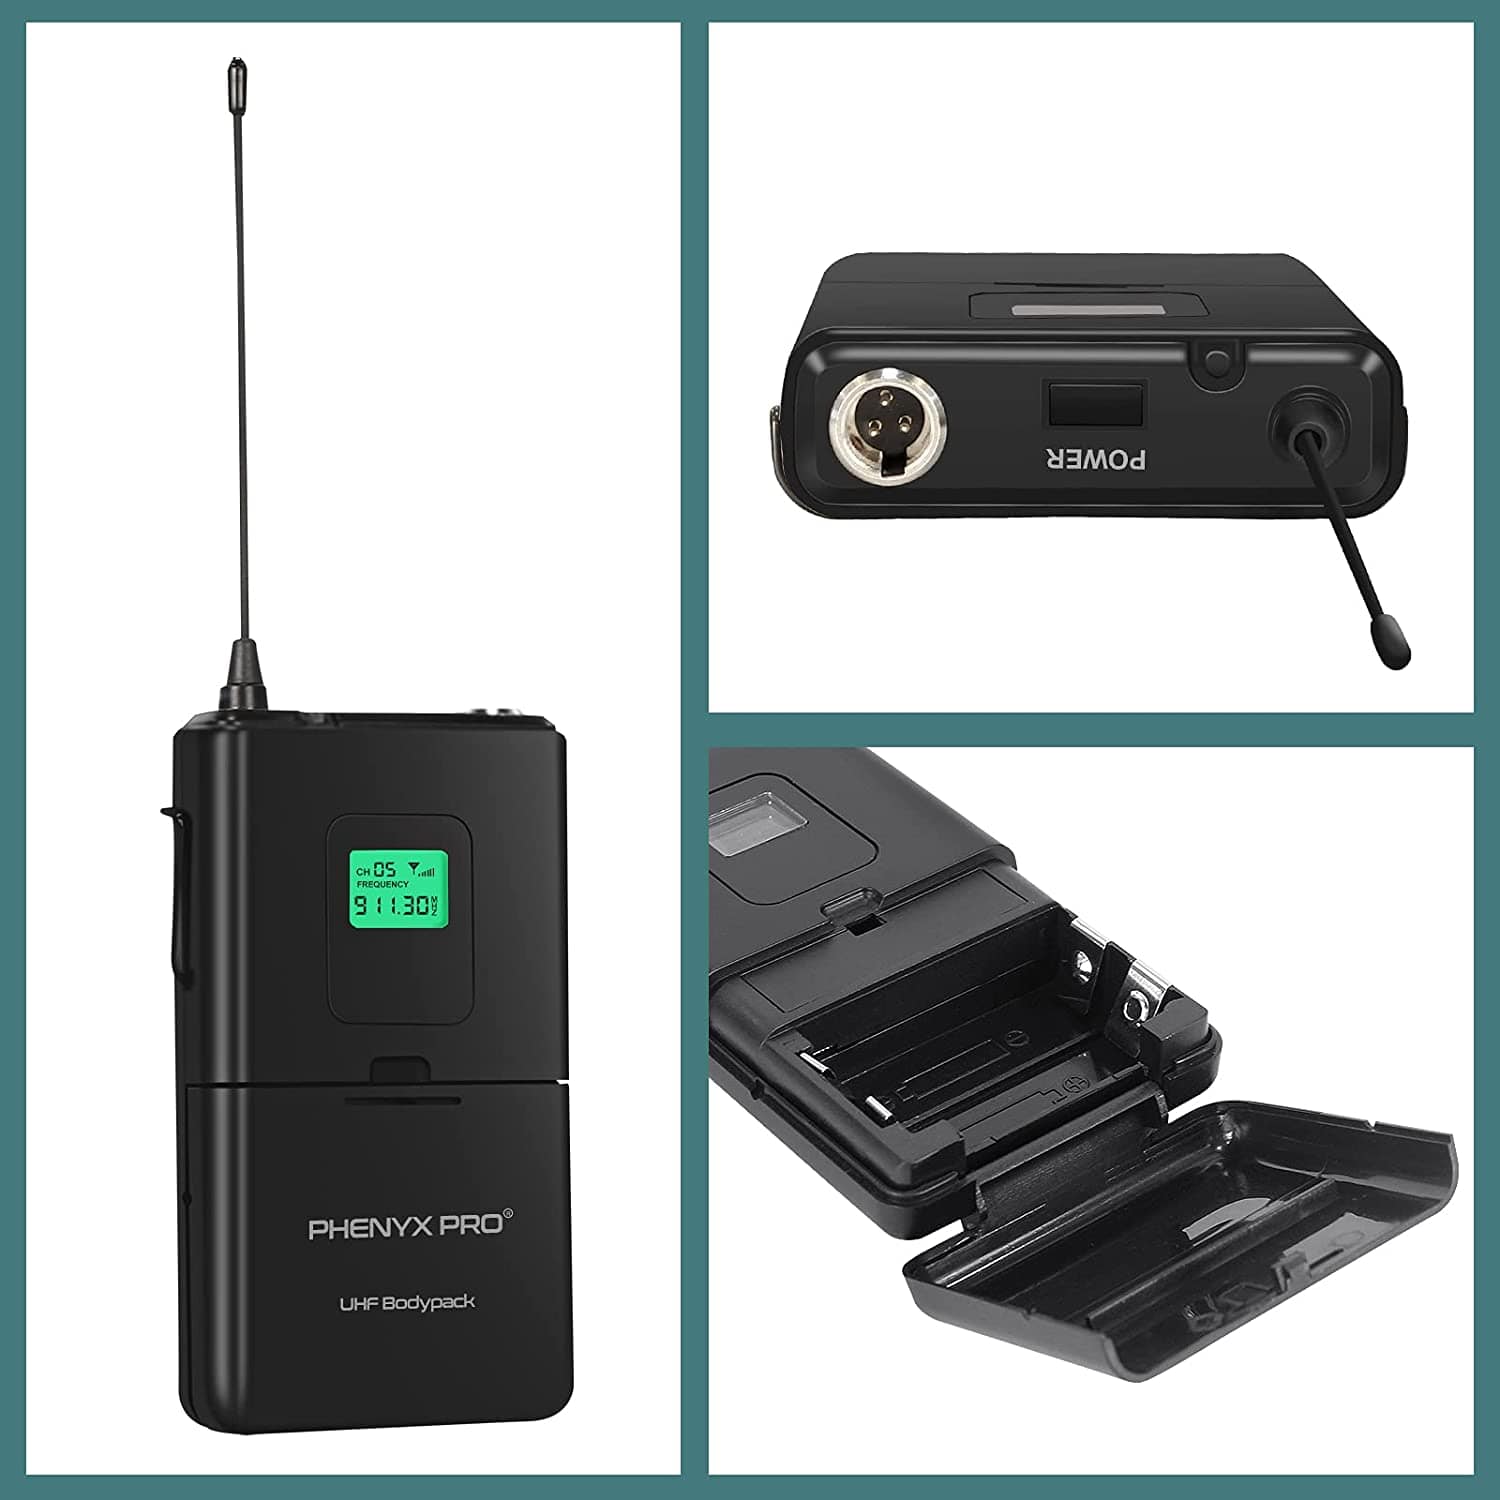 Phenyx Pro Wireless BodyPack Transmitter Compatible With Receiver PTU-4000